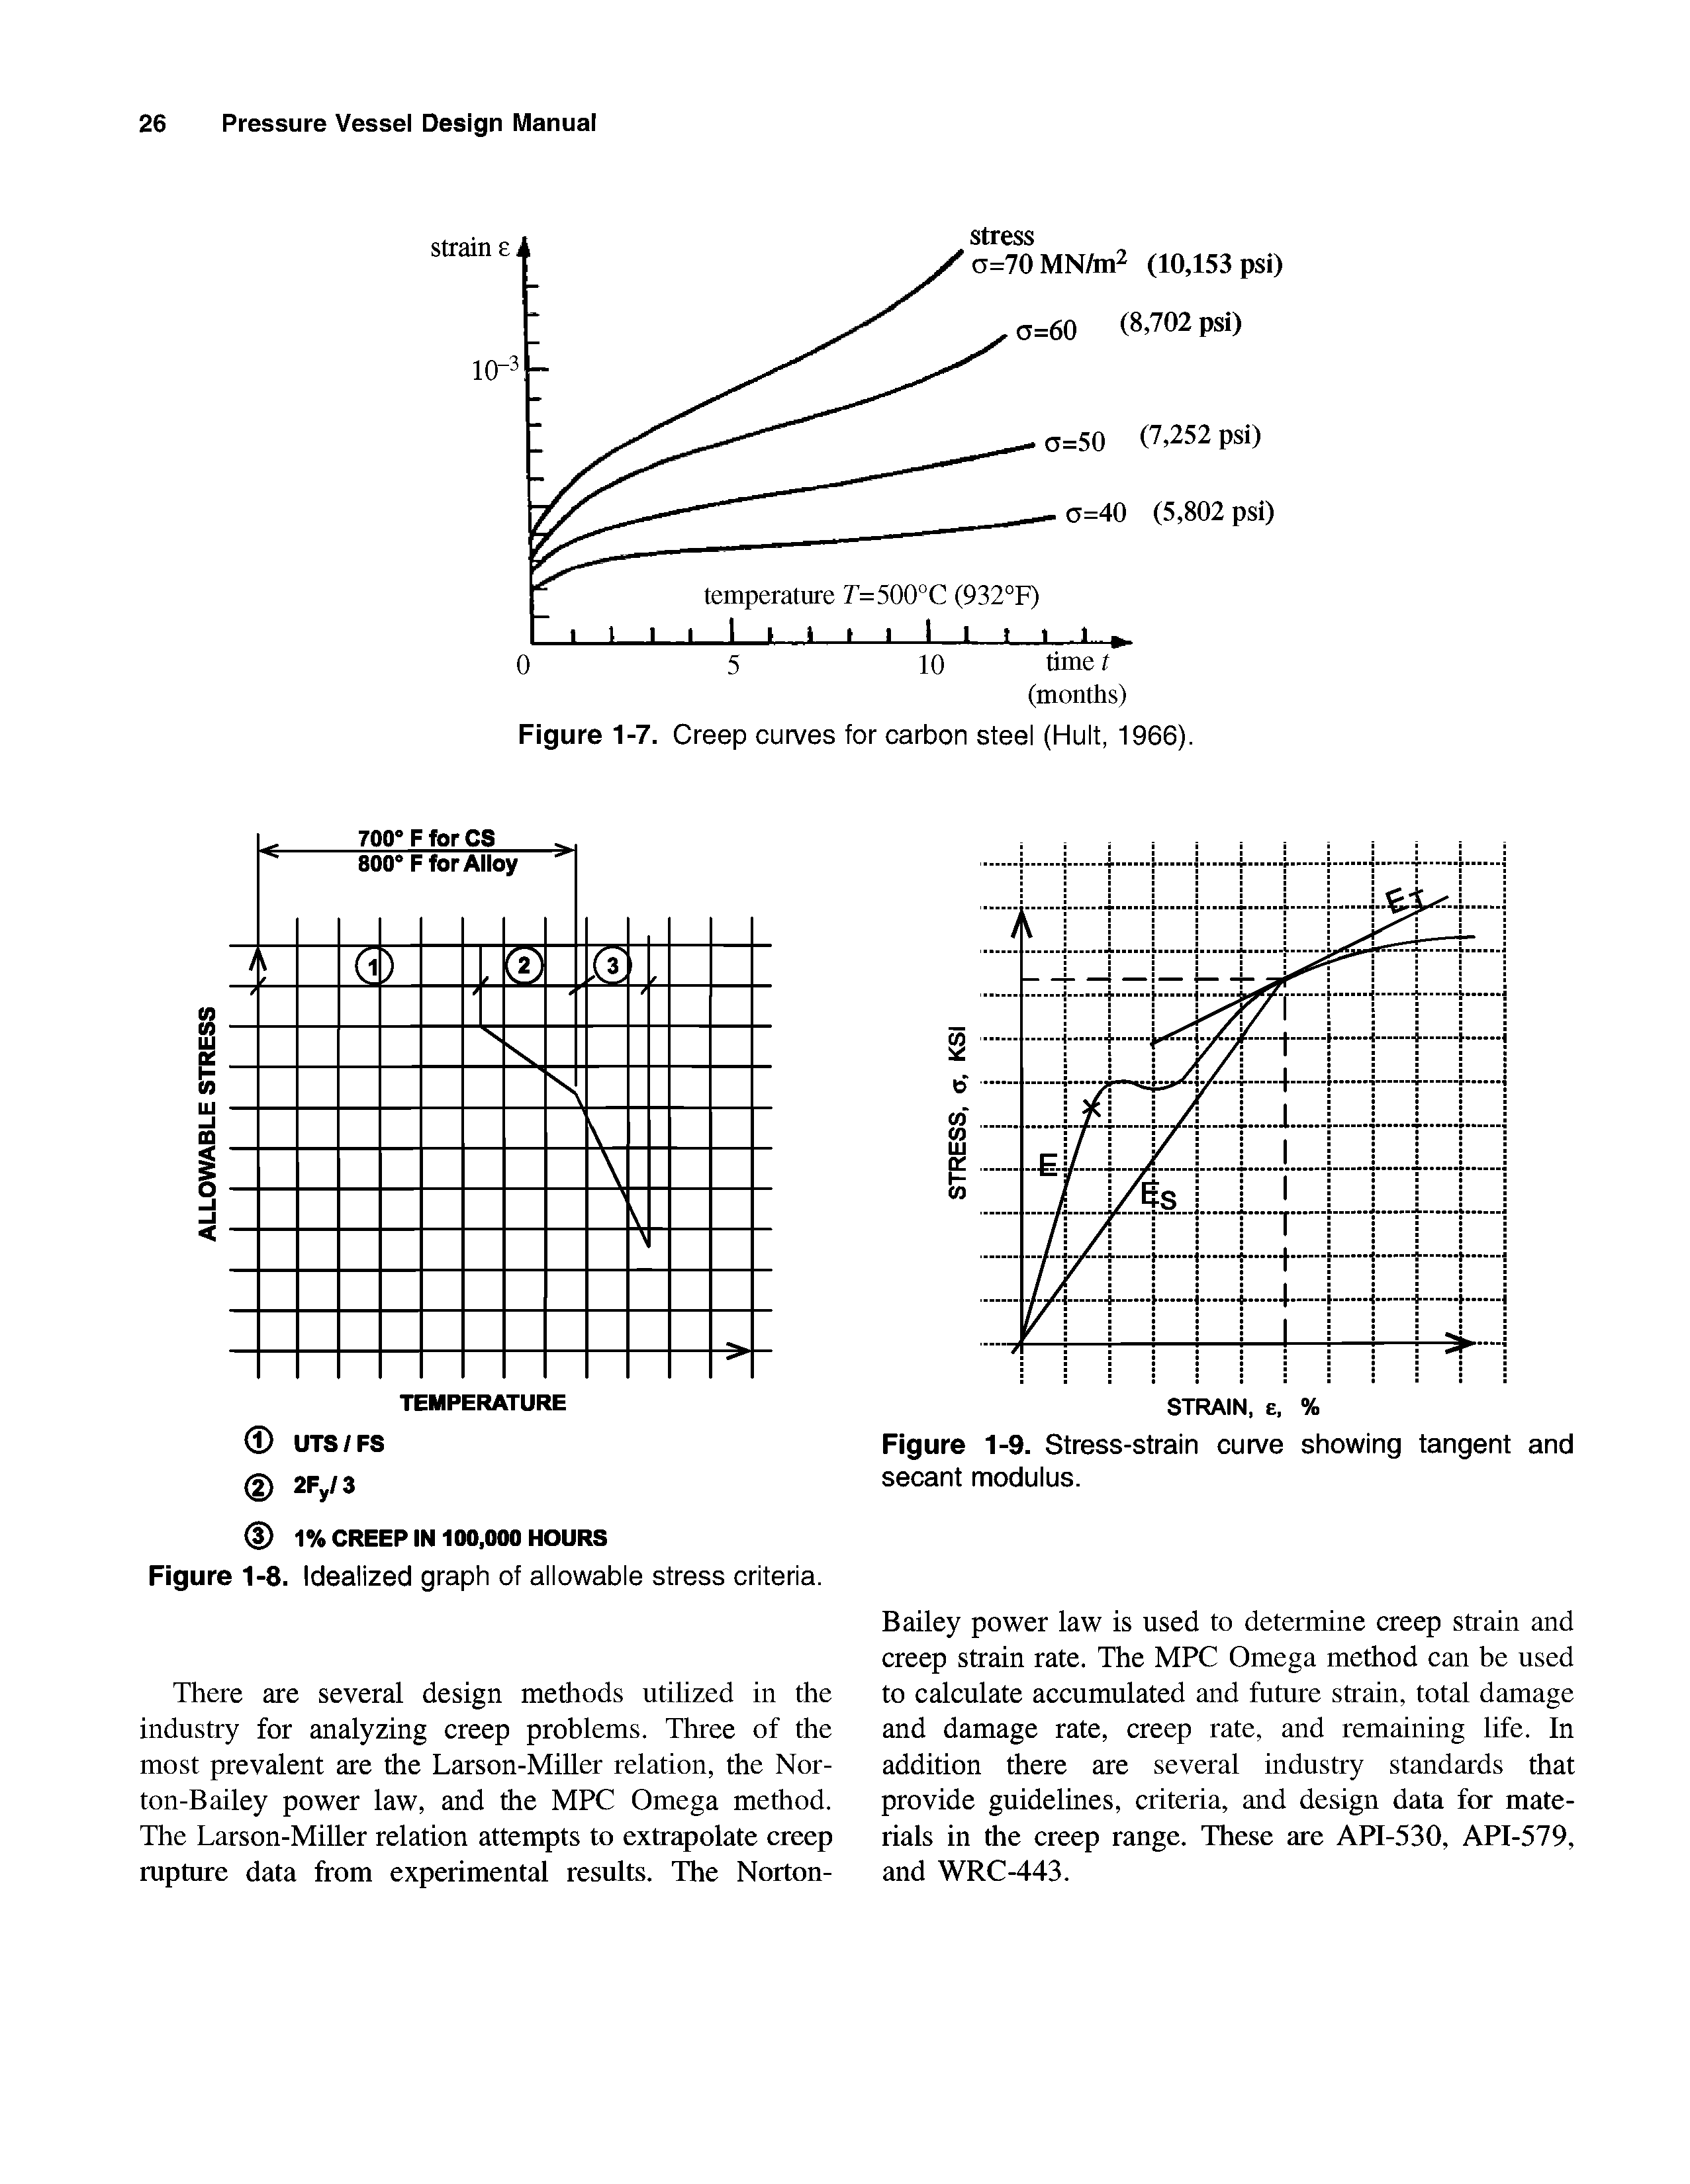 Figure 1-9. Stress-strain curve showing tangent and secant modulus.